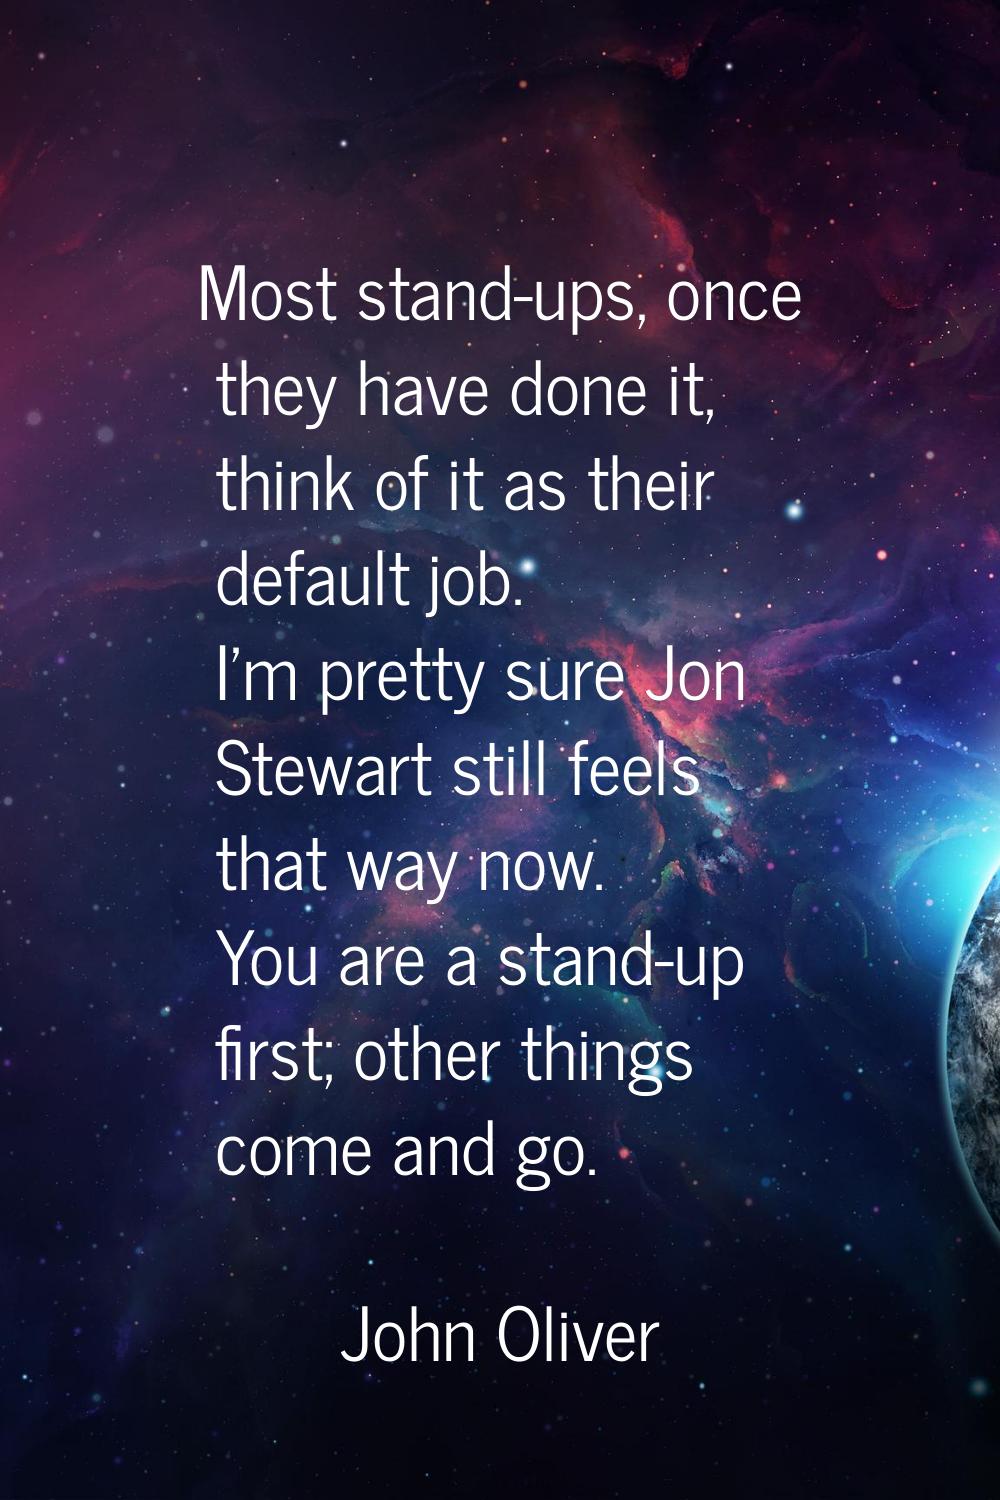 Most stand-ups, once they have done it, think of it as their default job. I'm pretty sure Jon Stewa